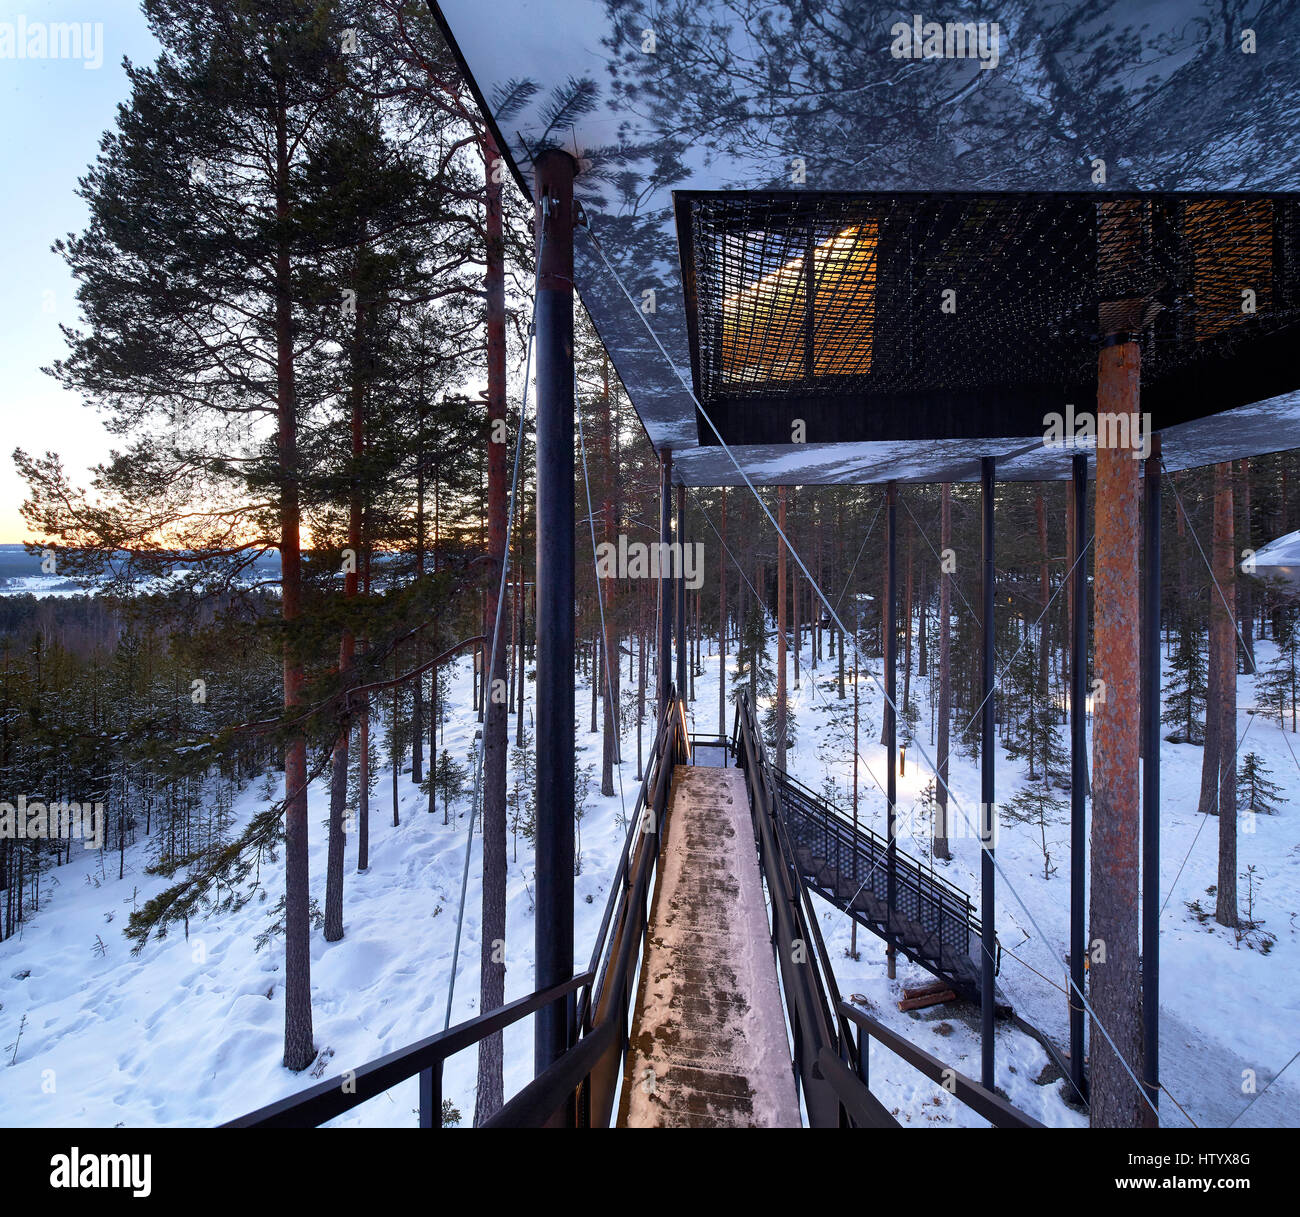 The 7th Room. Treehotel, Harads, Sweden. Architect: various, 2016. Stock Photo